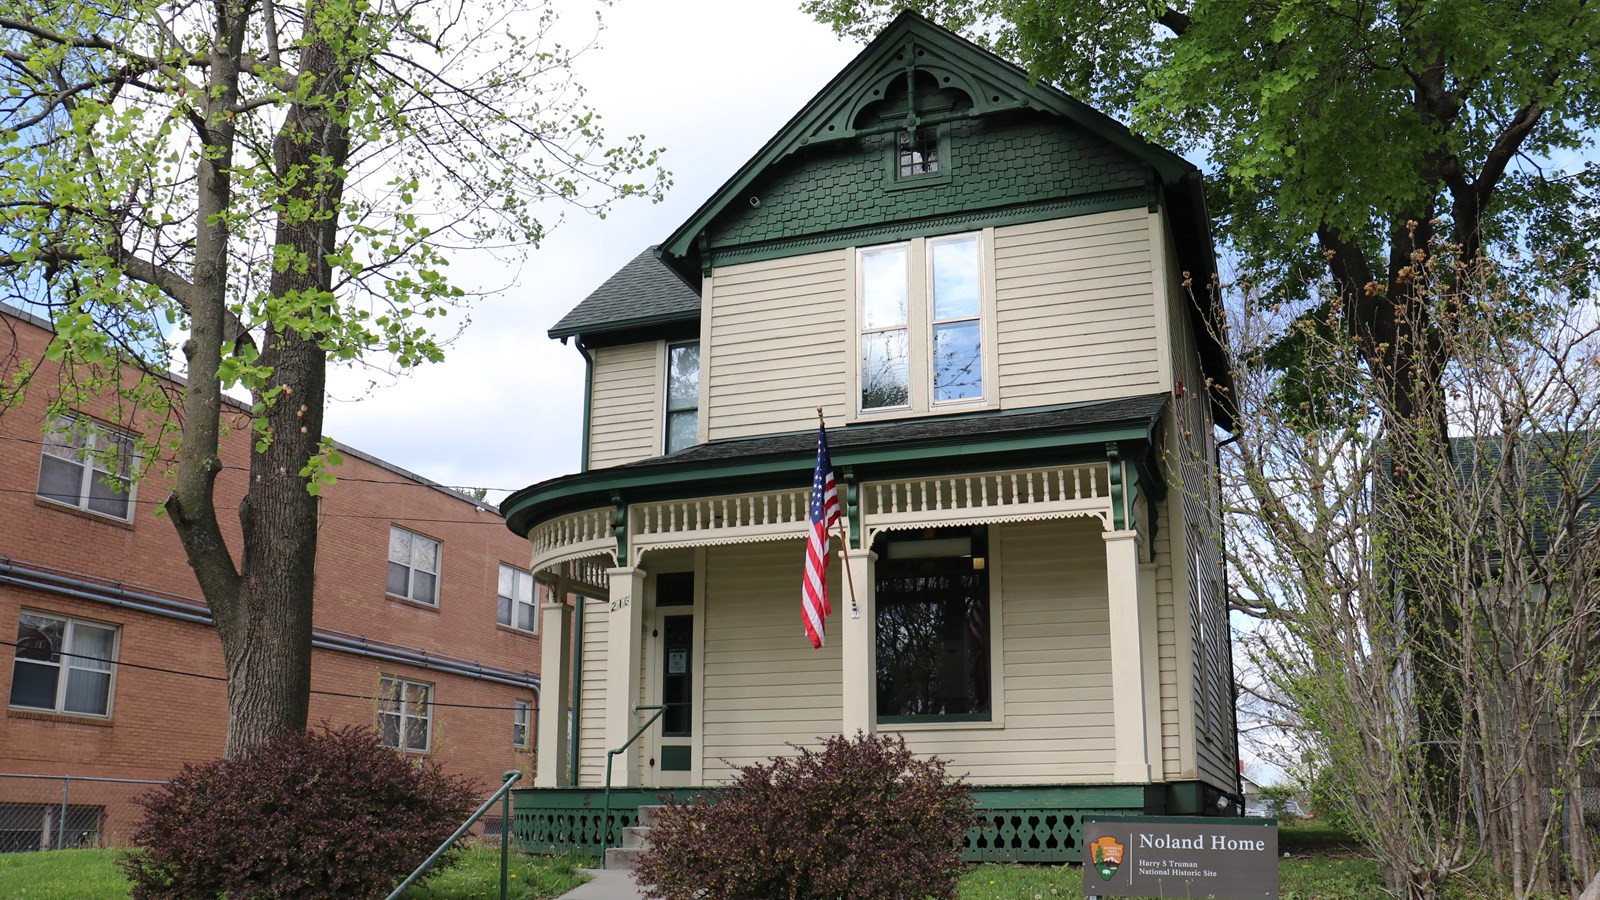 A yellow and green 2 story Victorian home with an American flag on the porch.